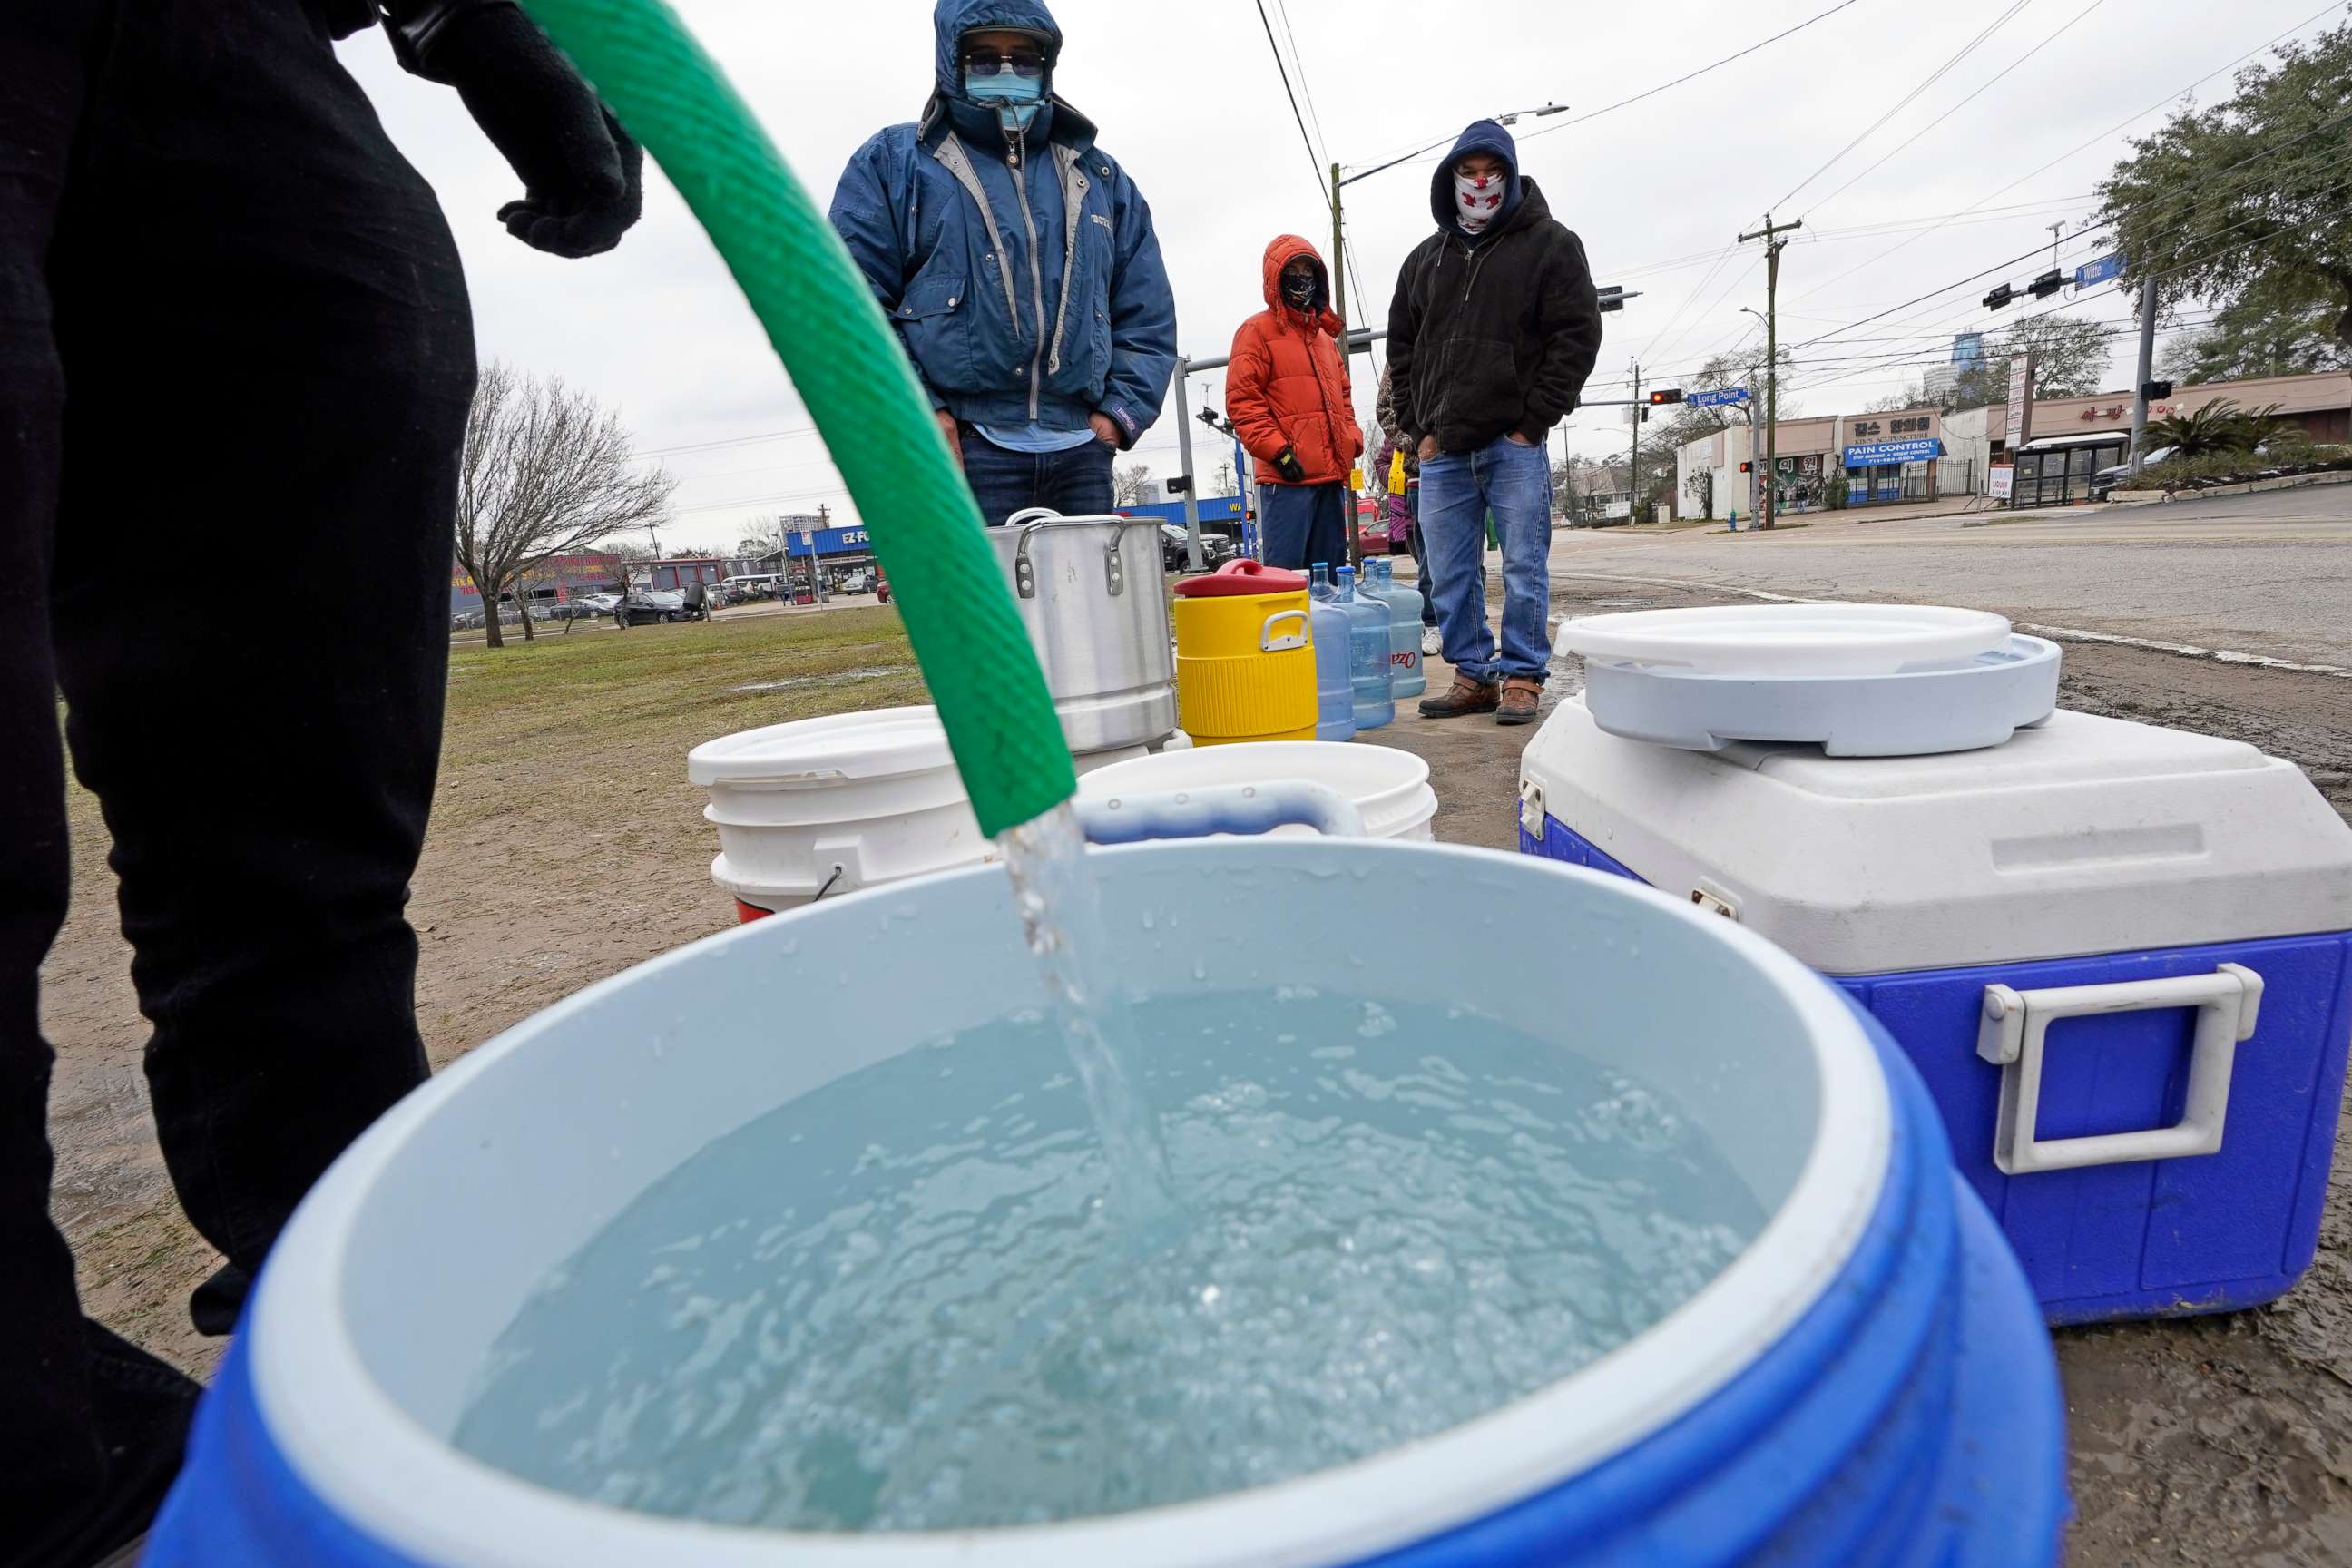 PHOTO: A water bucket is filled as others wait in near freezing temperatures to use a hose from public park spigot, Feb. 18, 2021, in Houston.